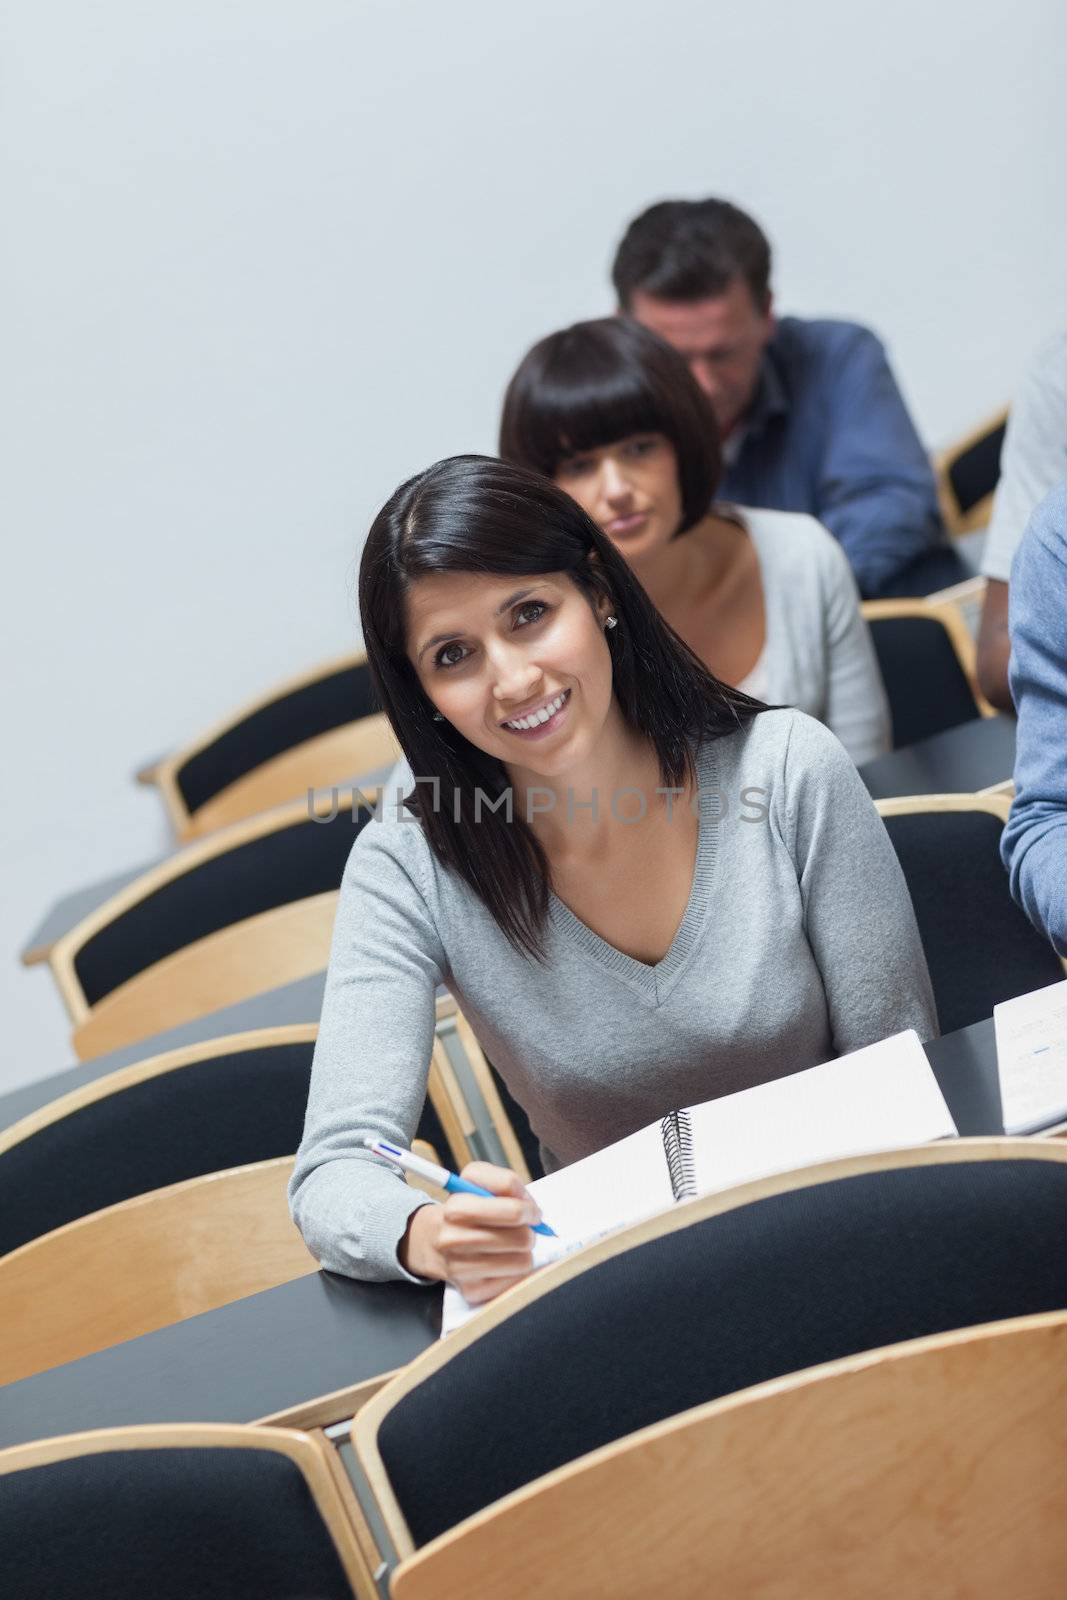 Smiling woman looking up from note taking during lecture in college